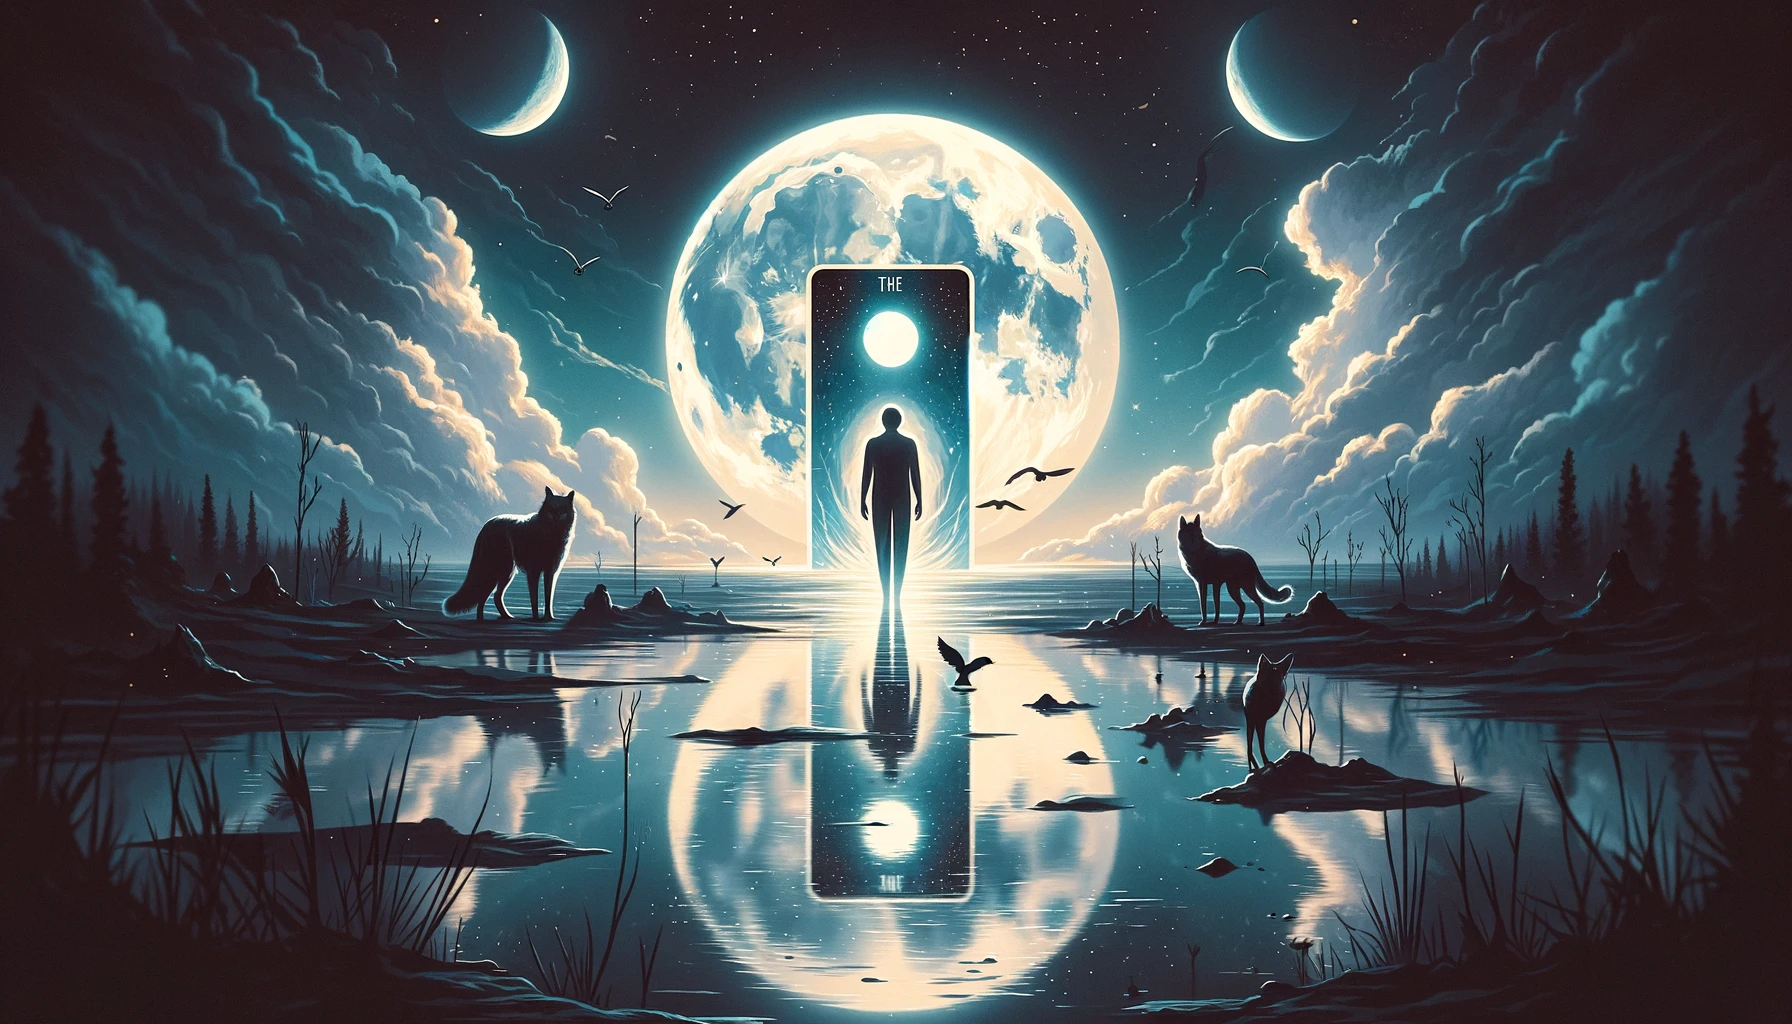 "Image representing themes of intuition, mystery, and exploration of the subconscious with 'The Moon' Tarot card. Sets a compelling and enigmatic tone for your article, discussing its reflection of individuals deeply connected to their inner world and the mysteries of the psyche."